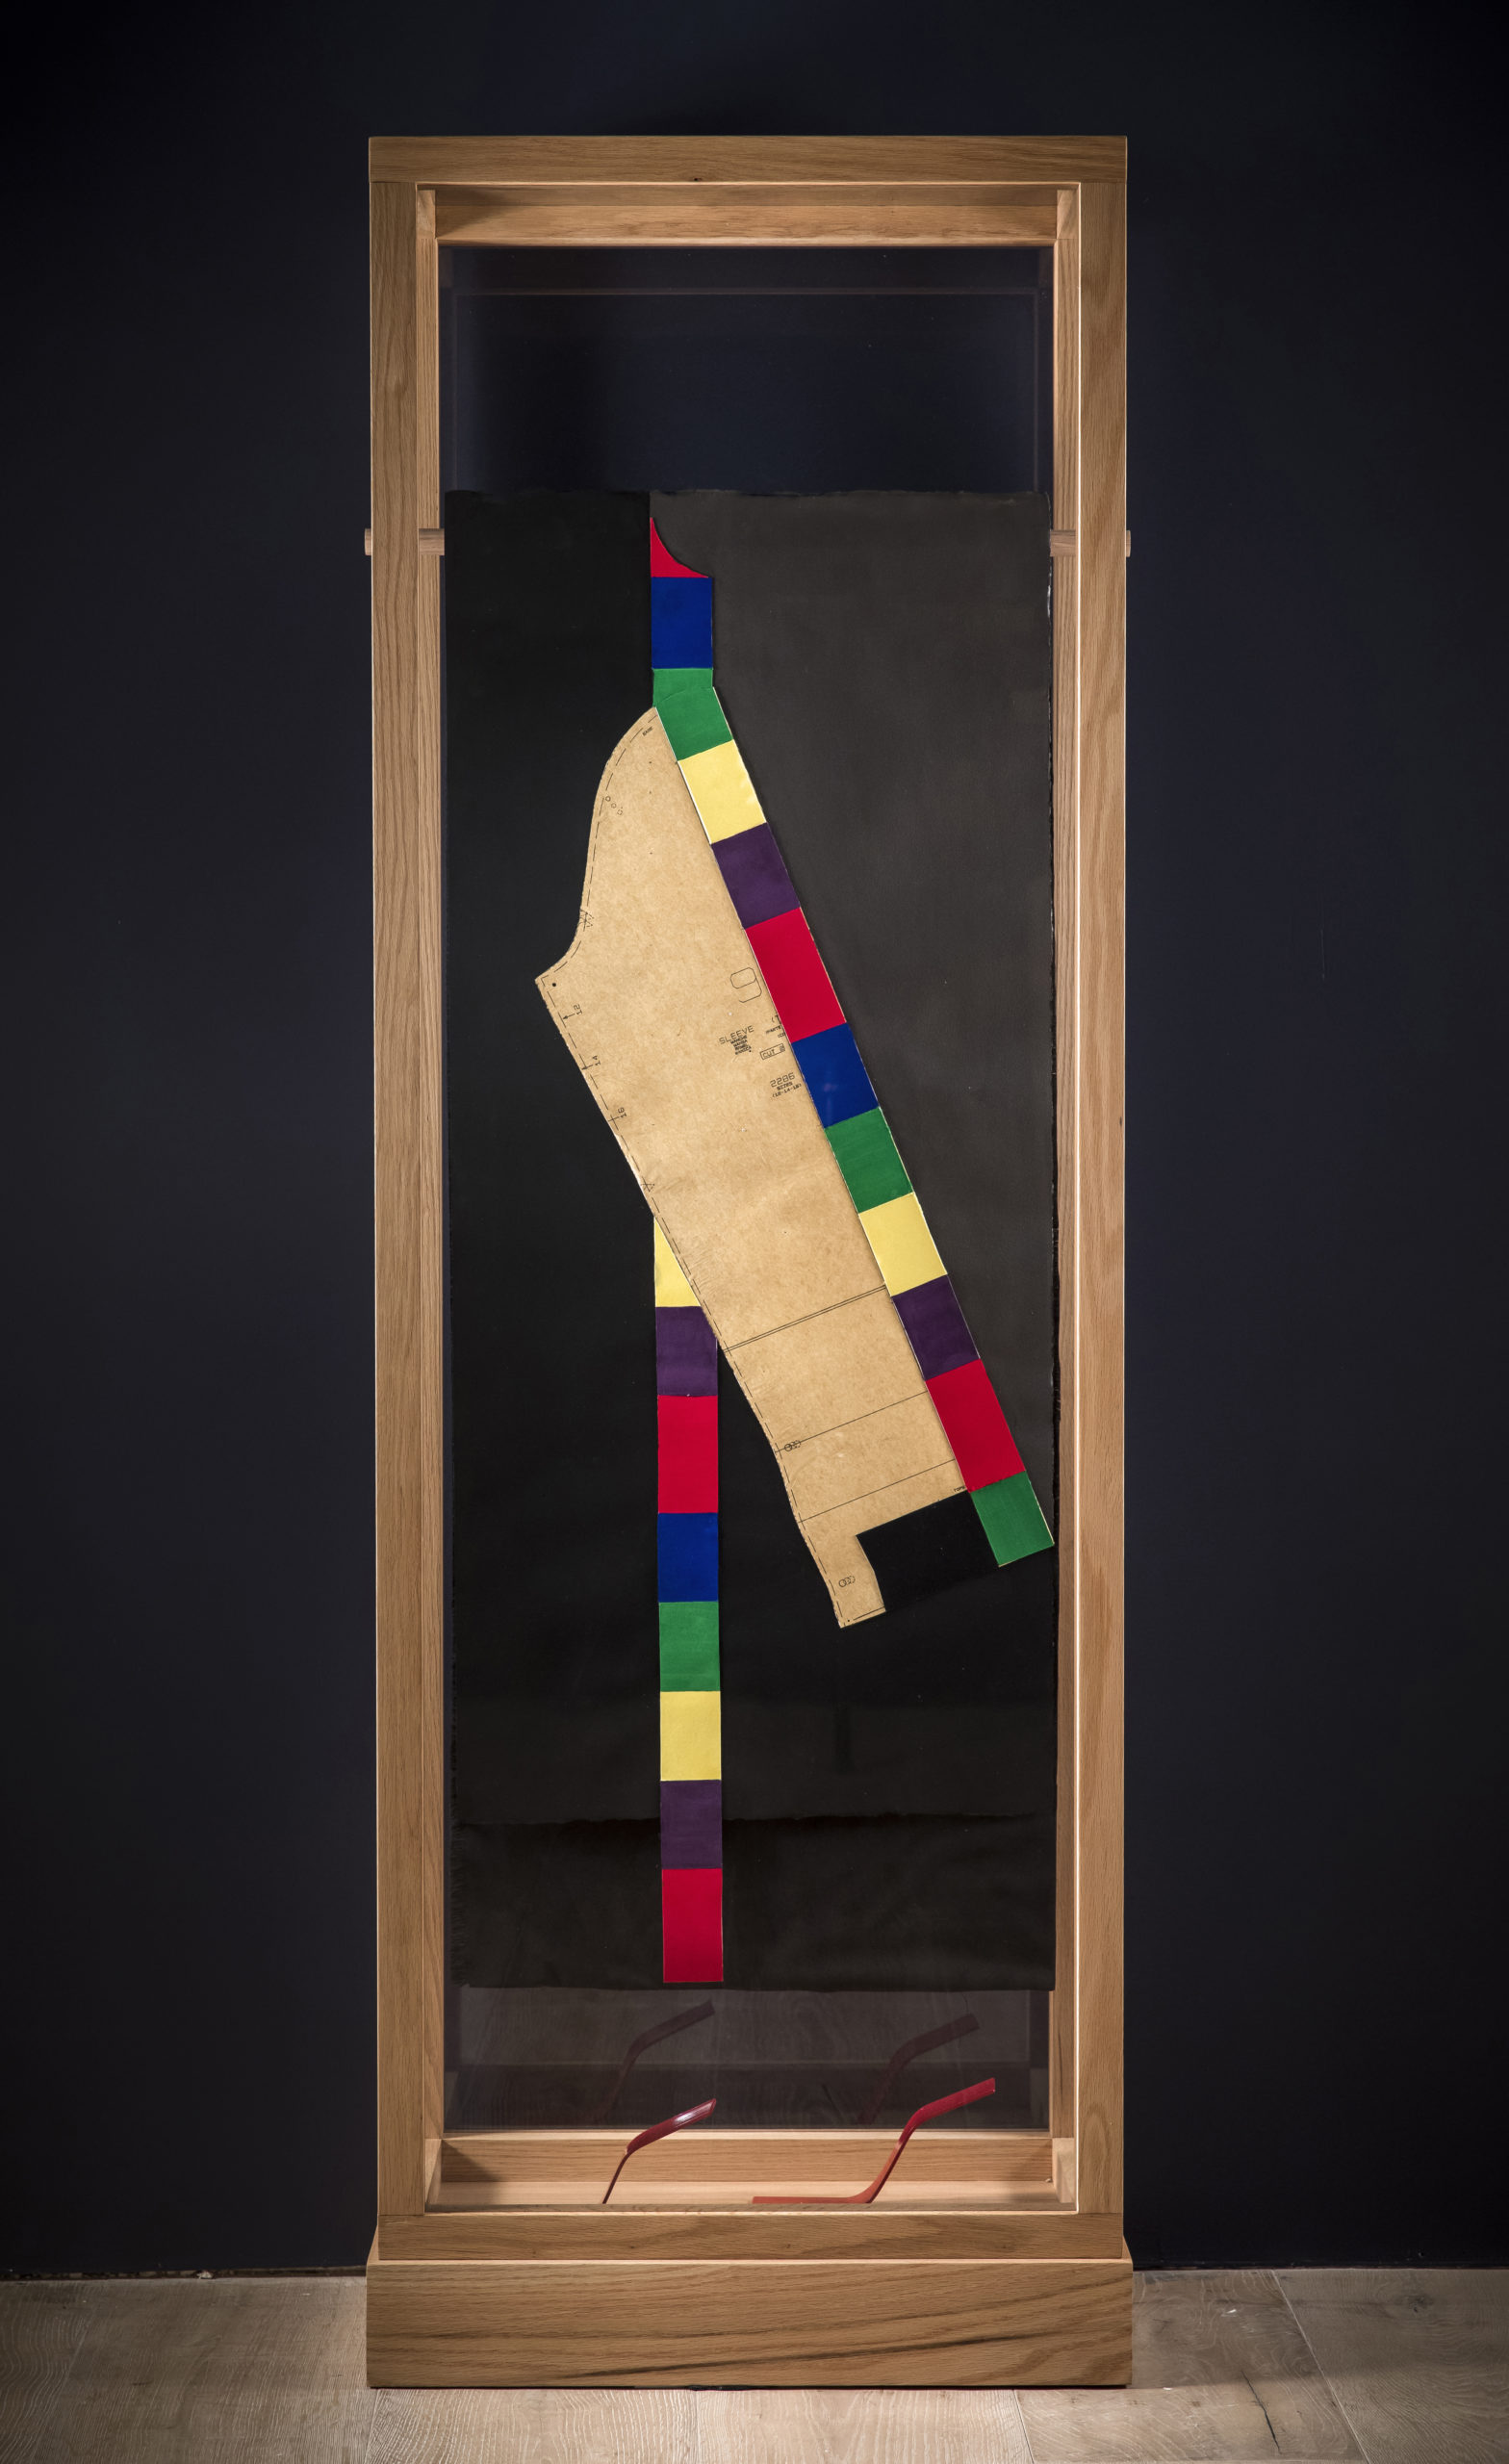 Shot of Adams' piece enclosed in a wooden box with glass sides; inside hangs a black paper with multi-colored stripes running up one side and the measurements for a garment hanging down the middle; two red paper heels rest on the floor of the box